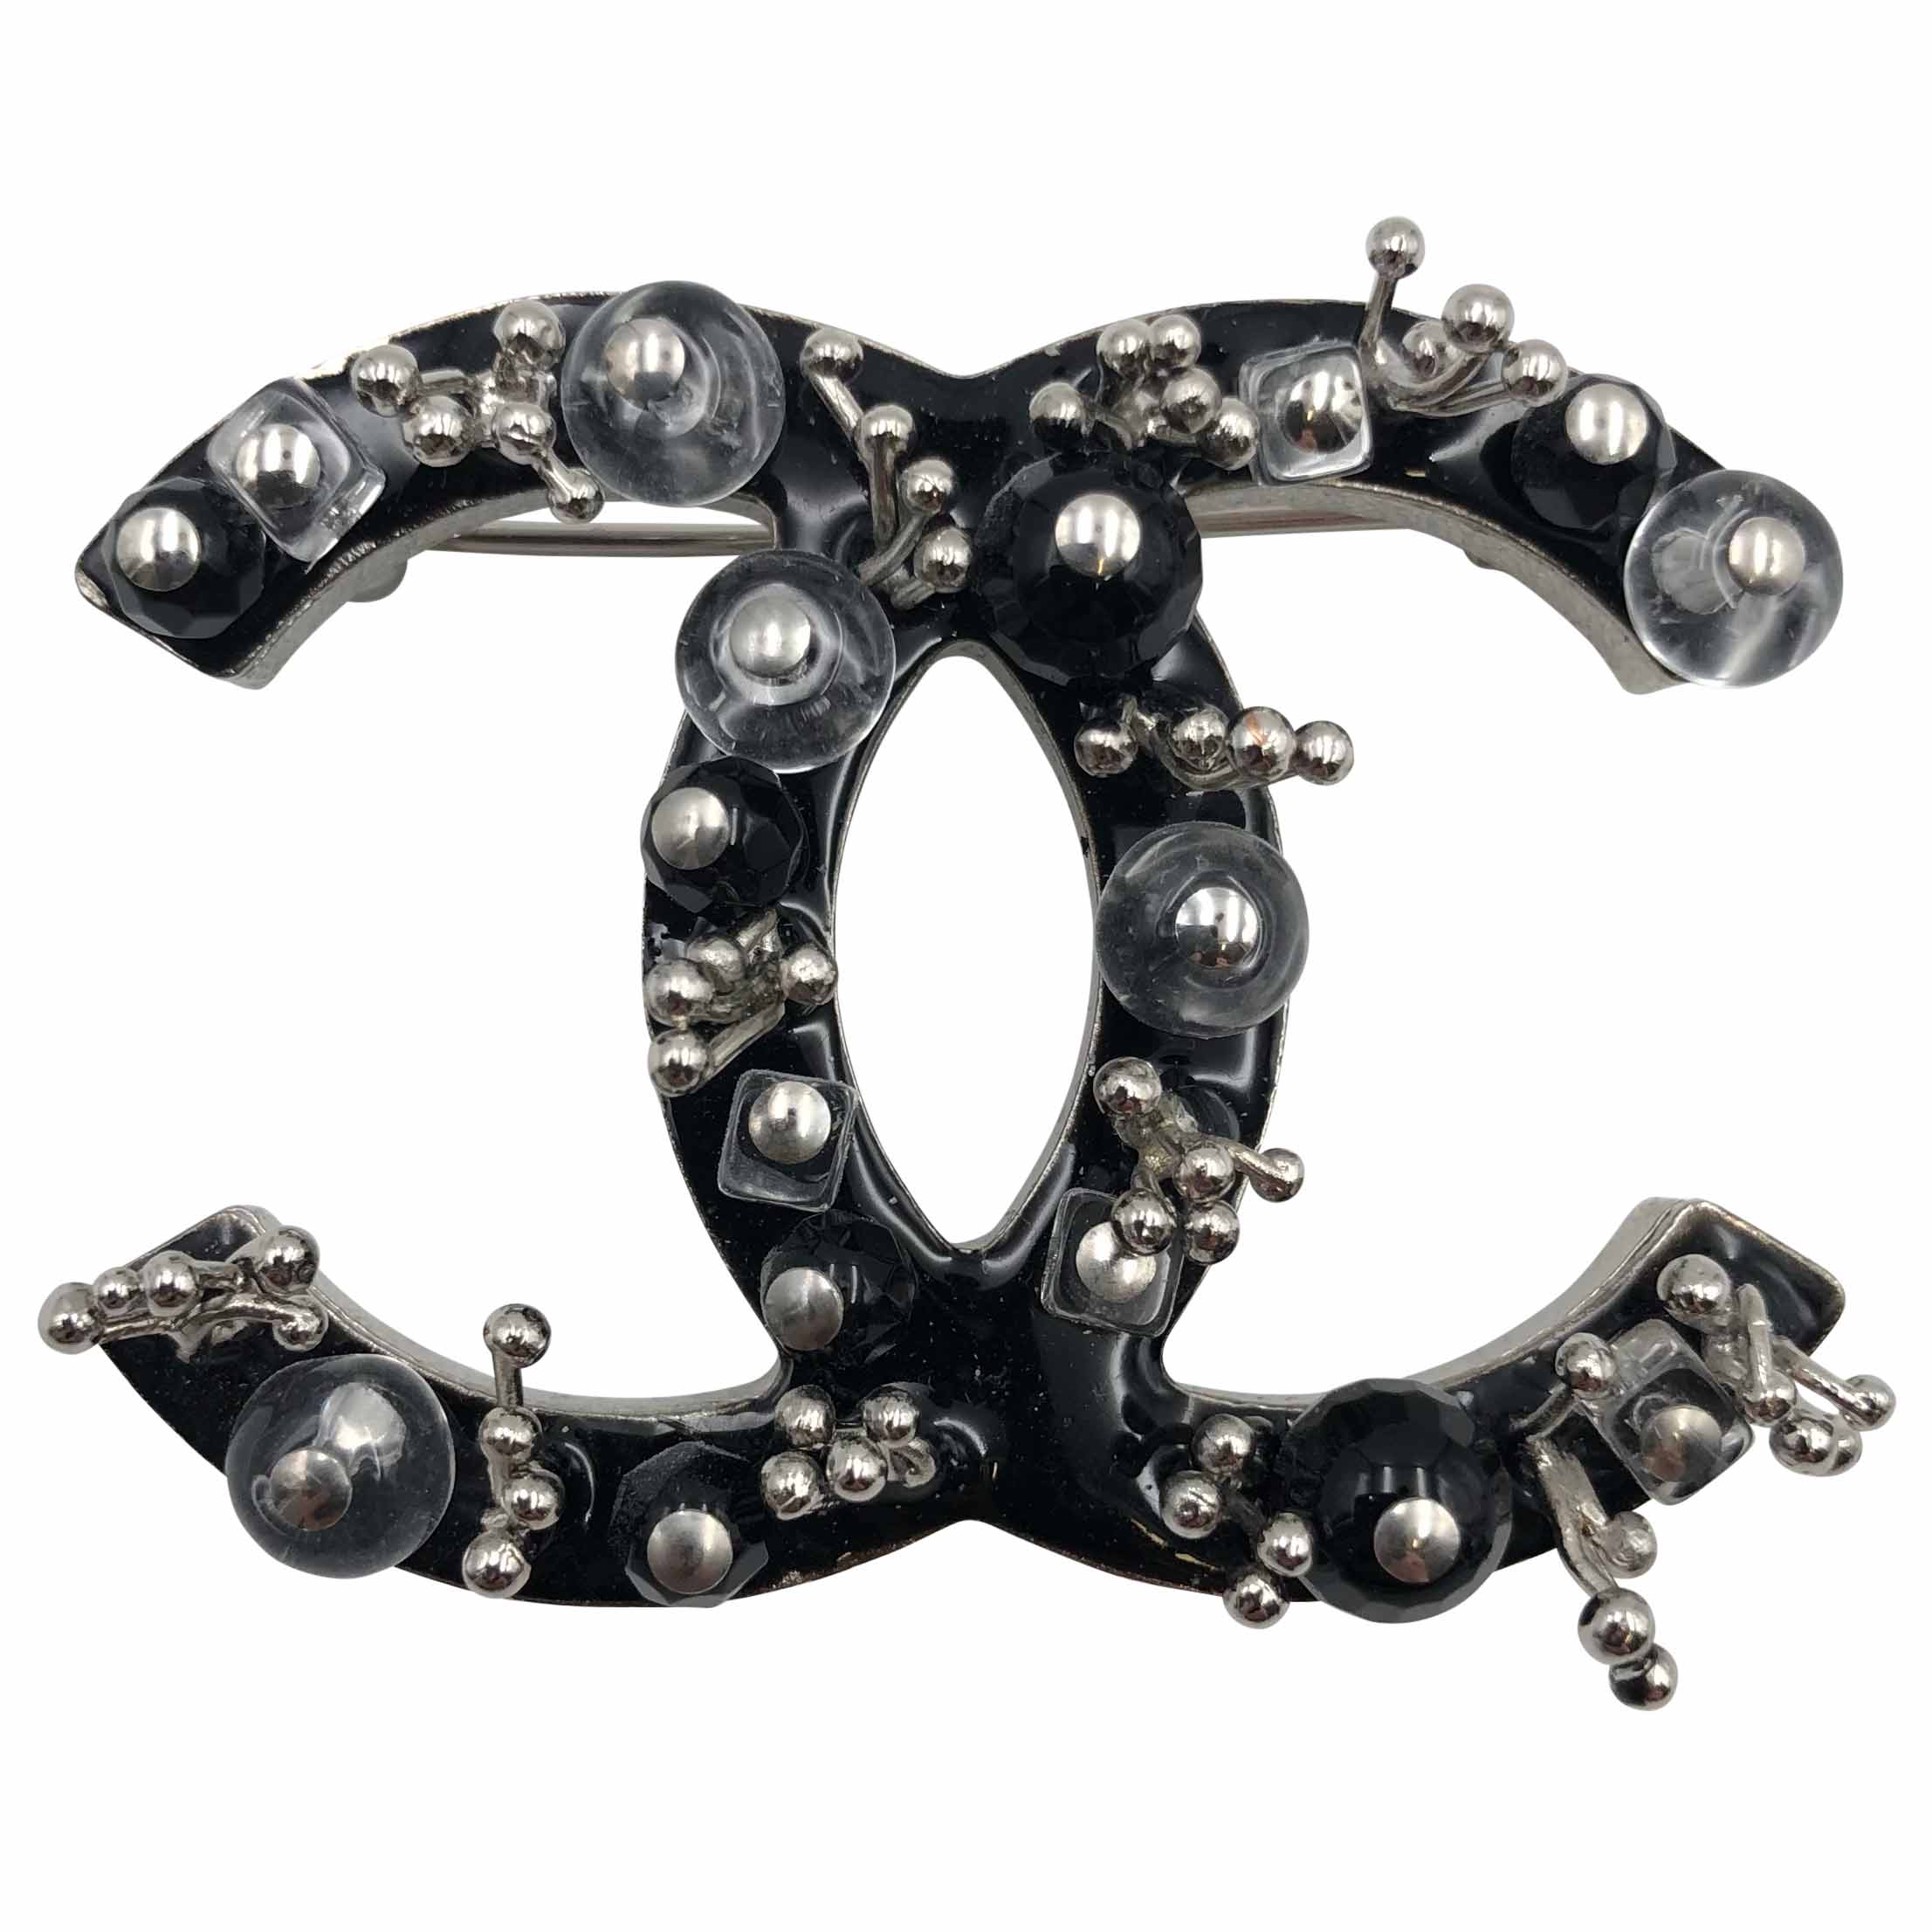 Chanel 2010 brooch in black enamel with black jet and clear round